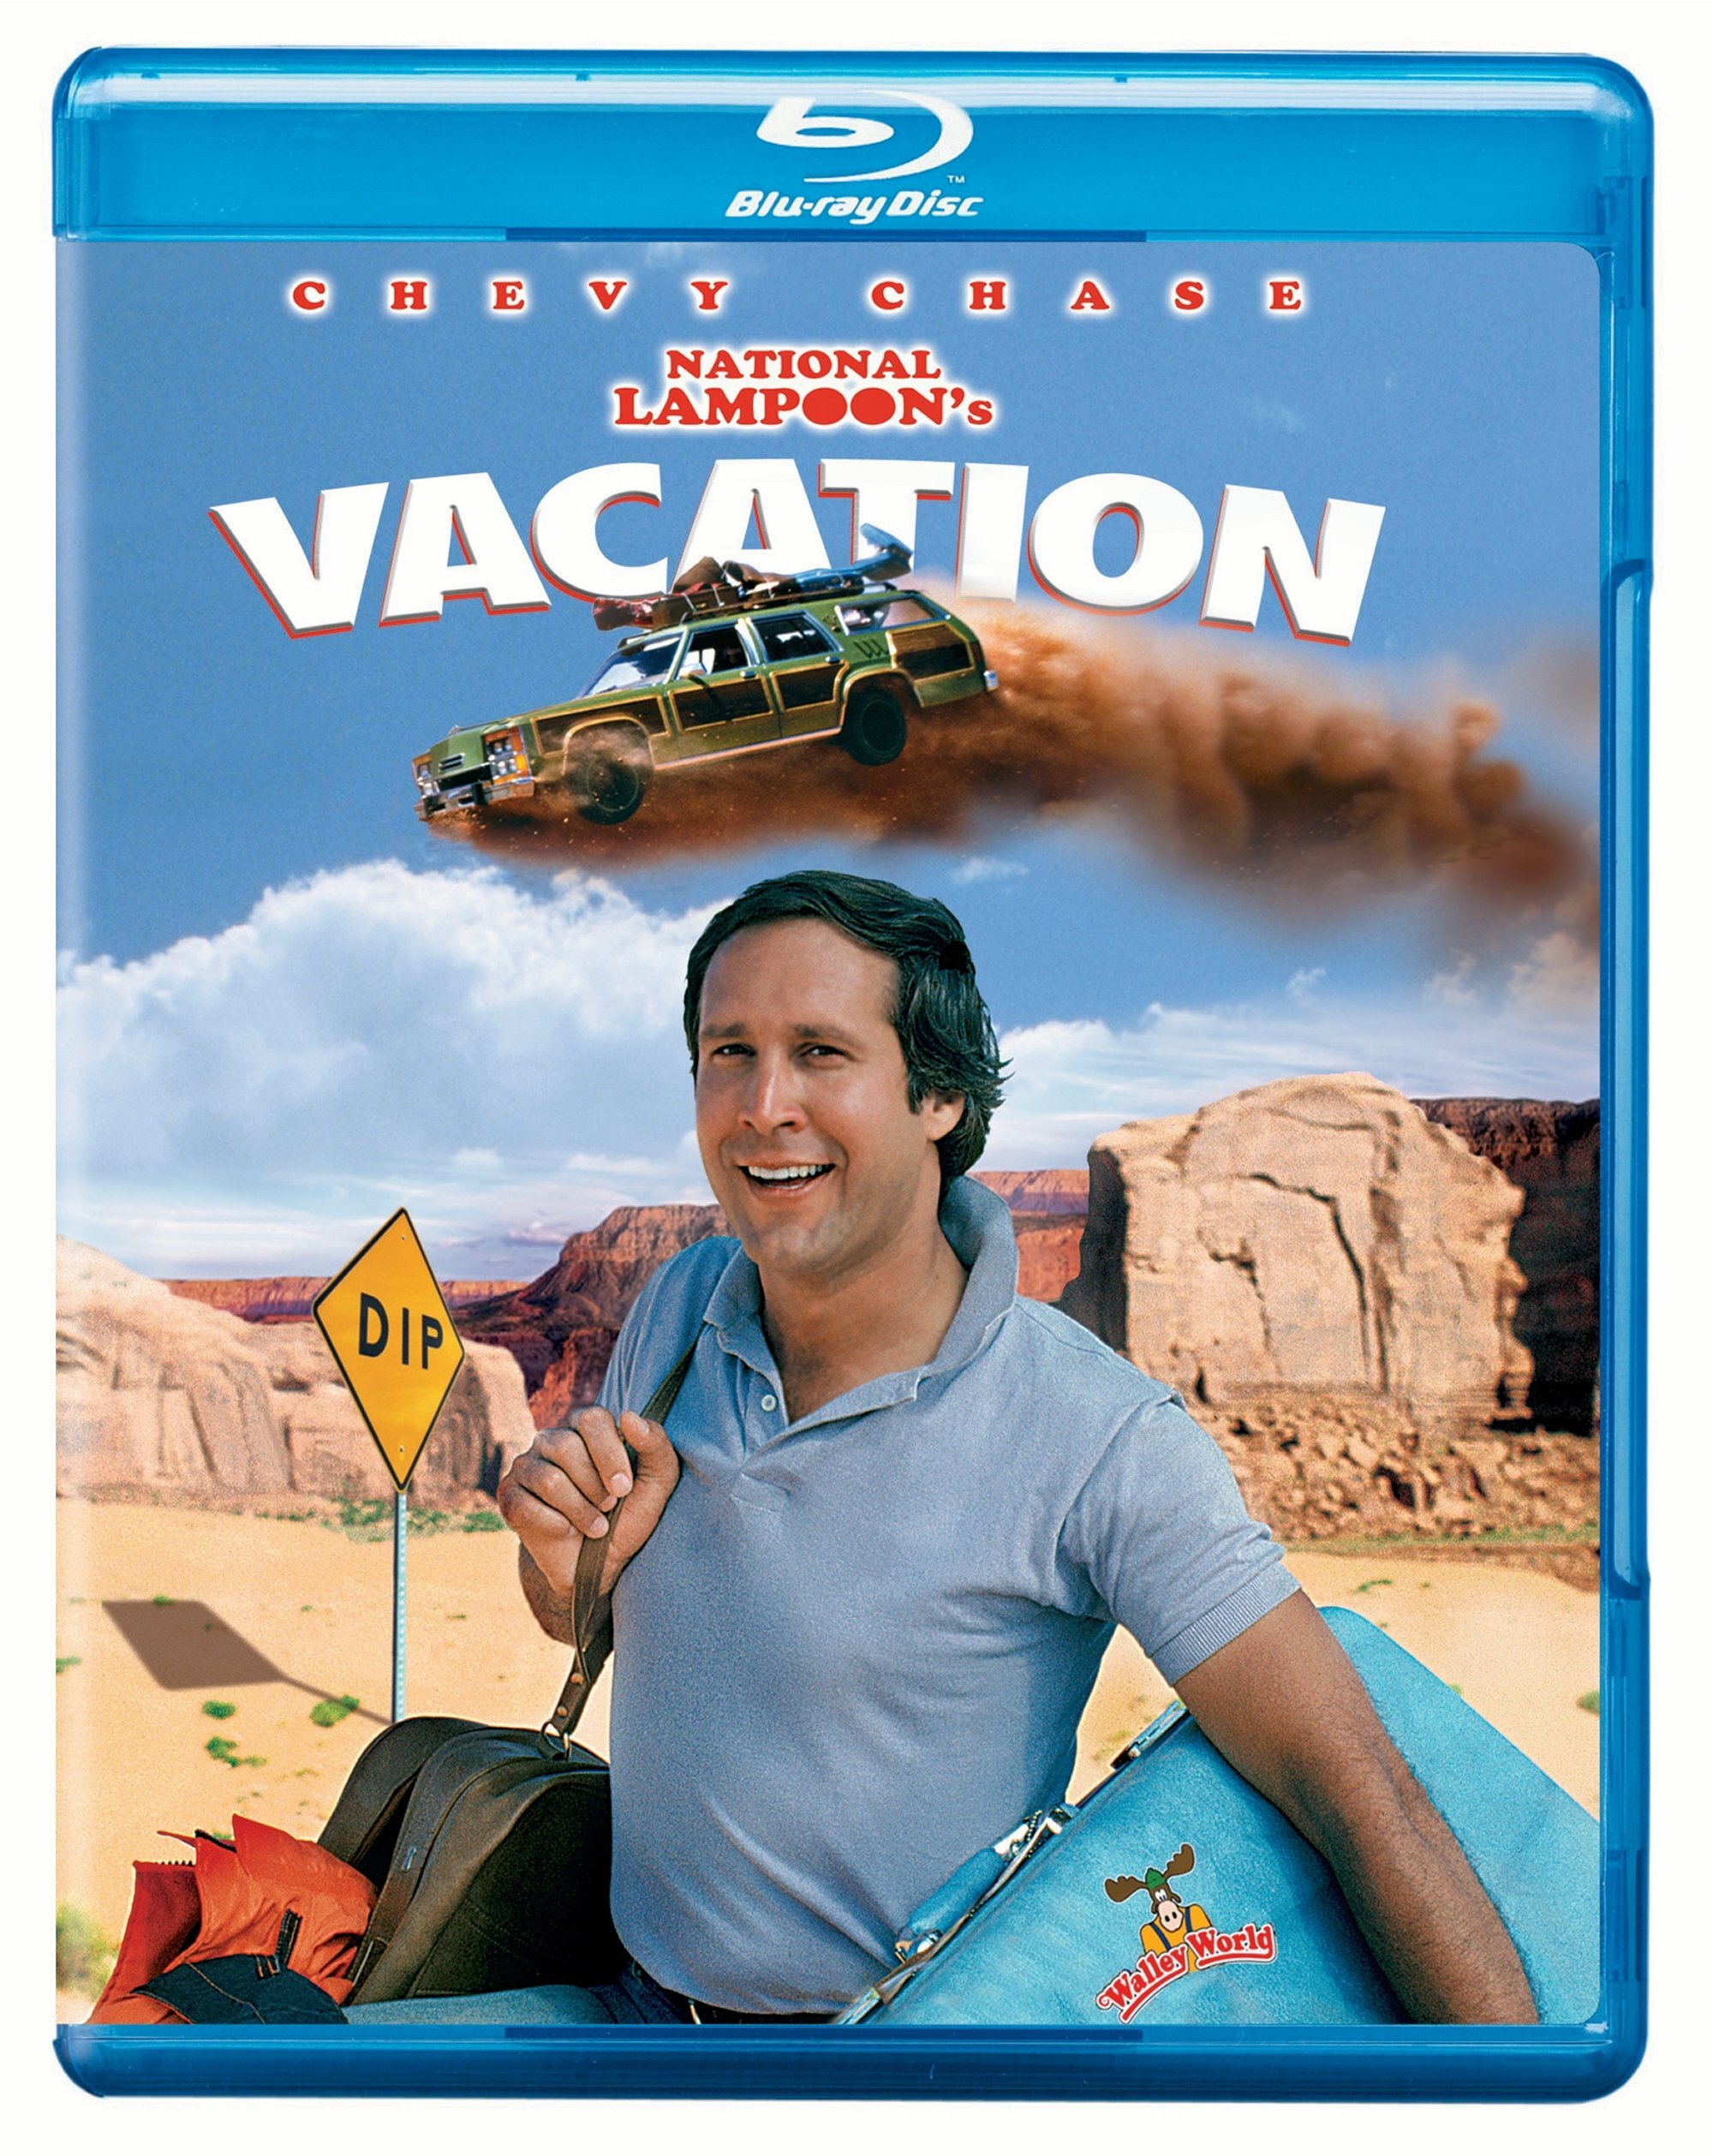 National Lampoon's Vacation - Blu-ray [ 1983 ]  - Comedy Movies On Blu-ray - Movies On GRUV